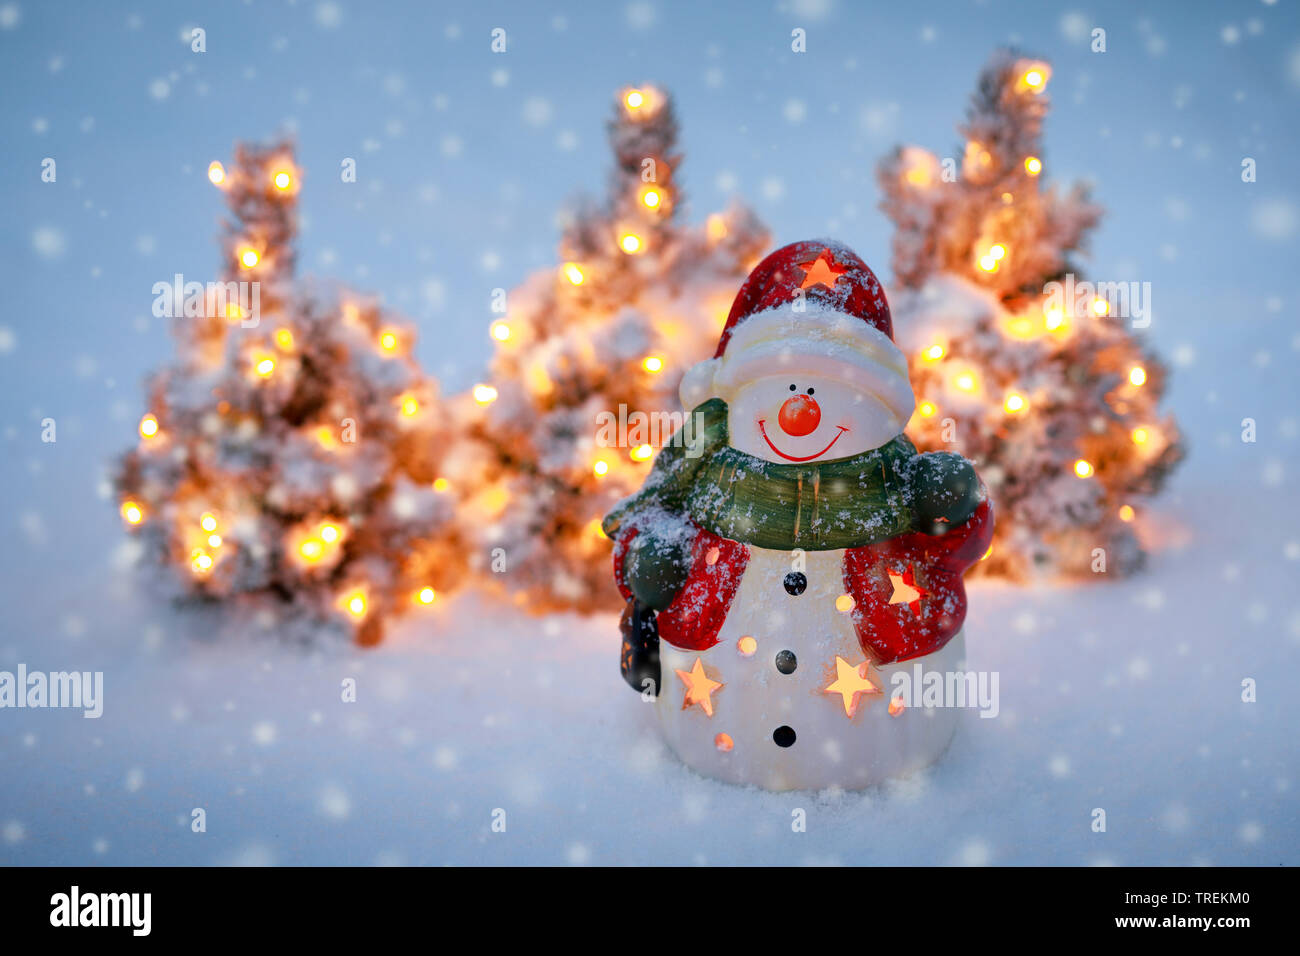 snowman and small illuminated Christmas trees in snow Stock Photo